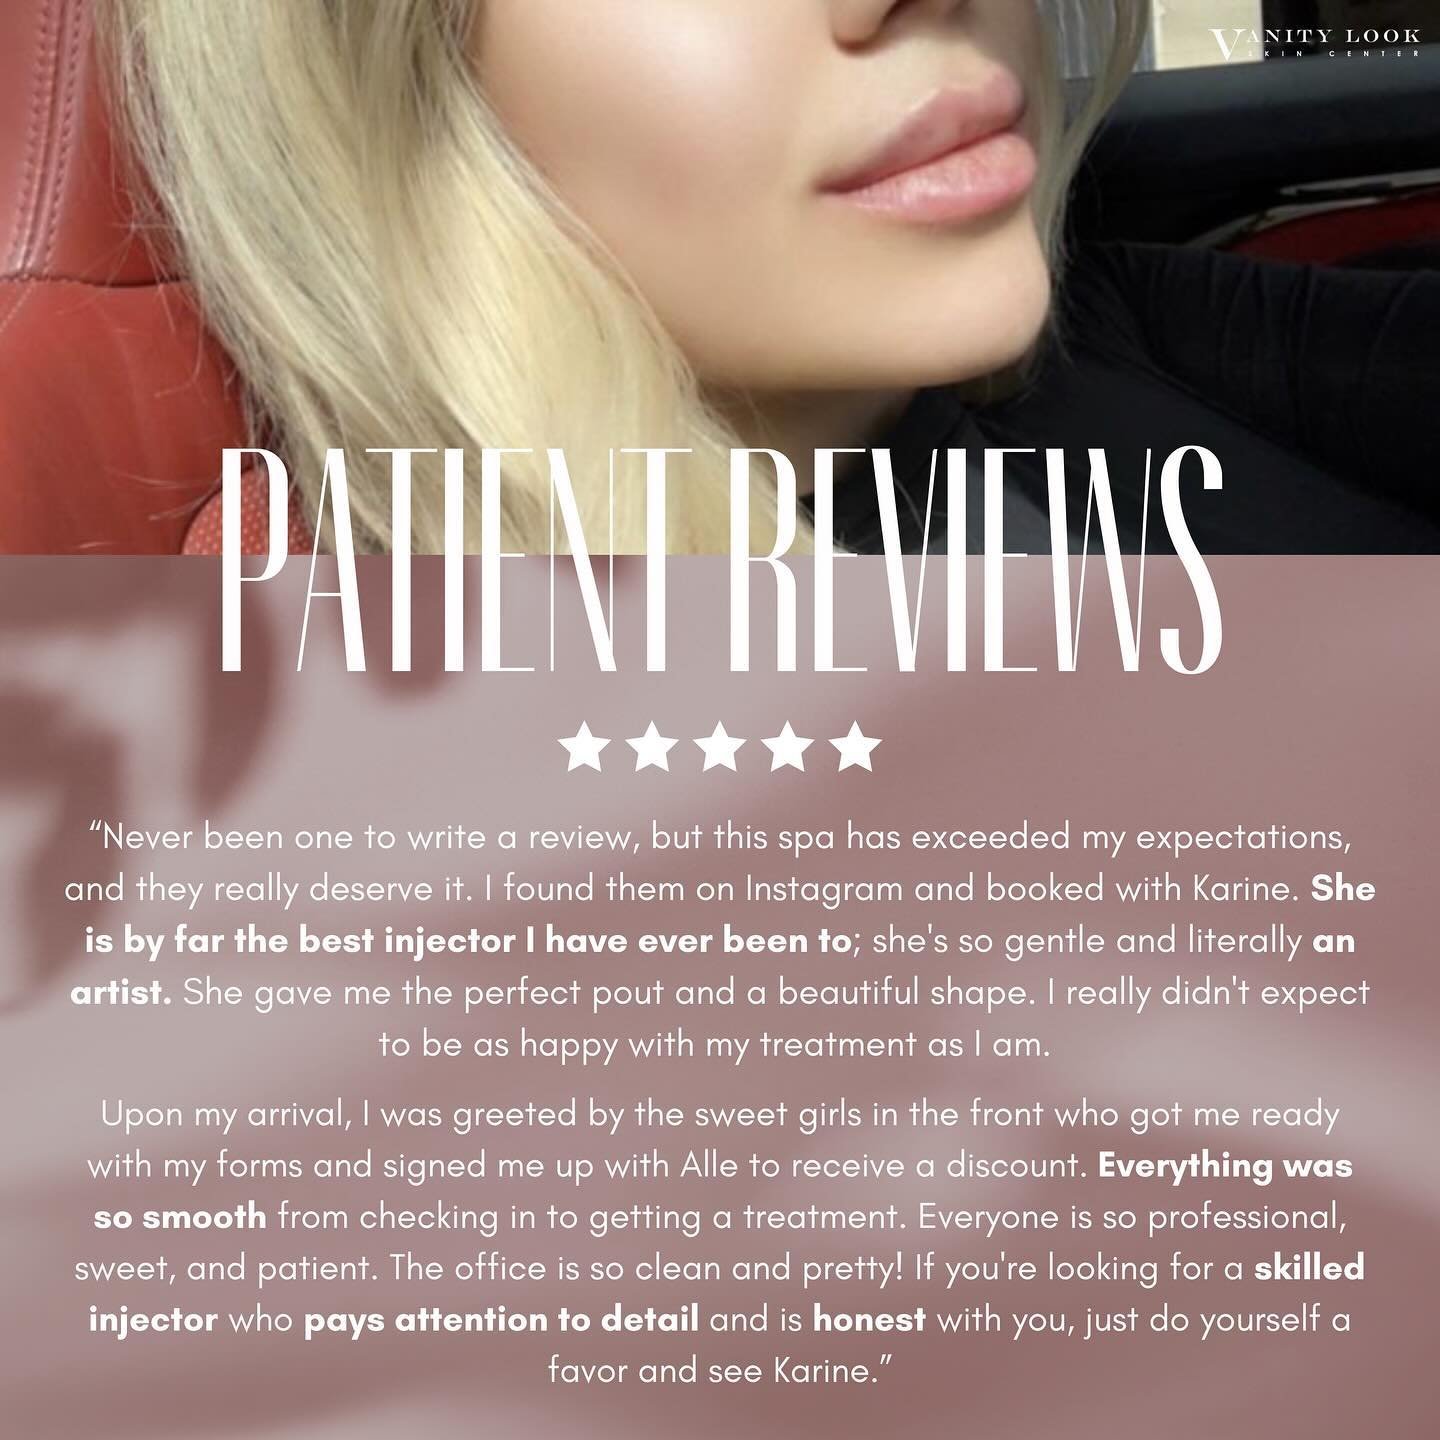 Reviews like this from our patients literally brighten up our day! 😍 How beautiful is her pout? 👄💉

Services we offer:
▪️ Fillers 
▪️ Anti-aging treatments
▪️ Facial Balancing
▪️ Laser Hair Removal
▪️ Skin Rejuvenation
▪️ Morpheus8 for face and bo